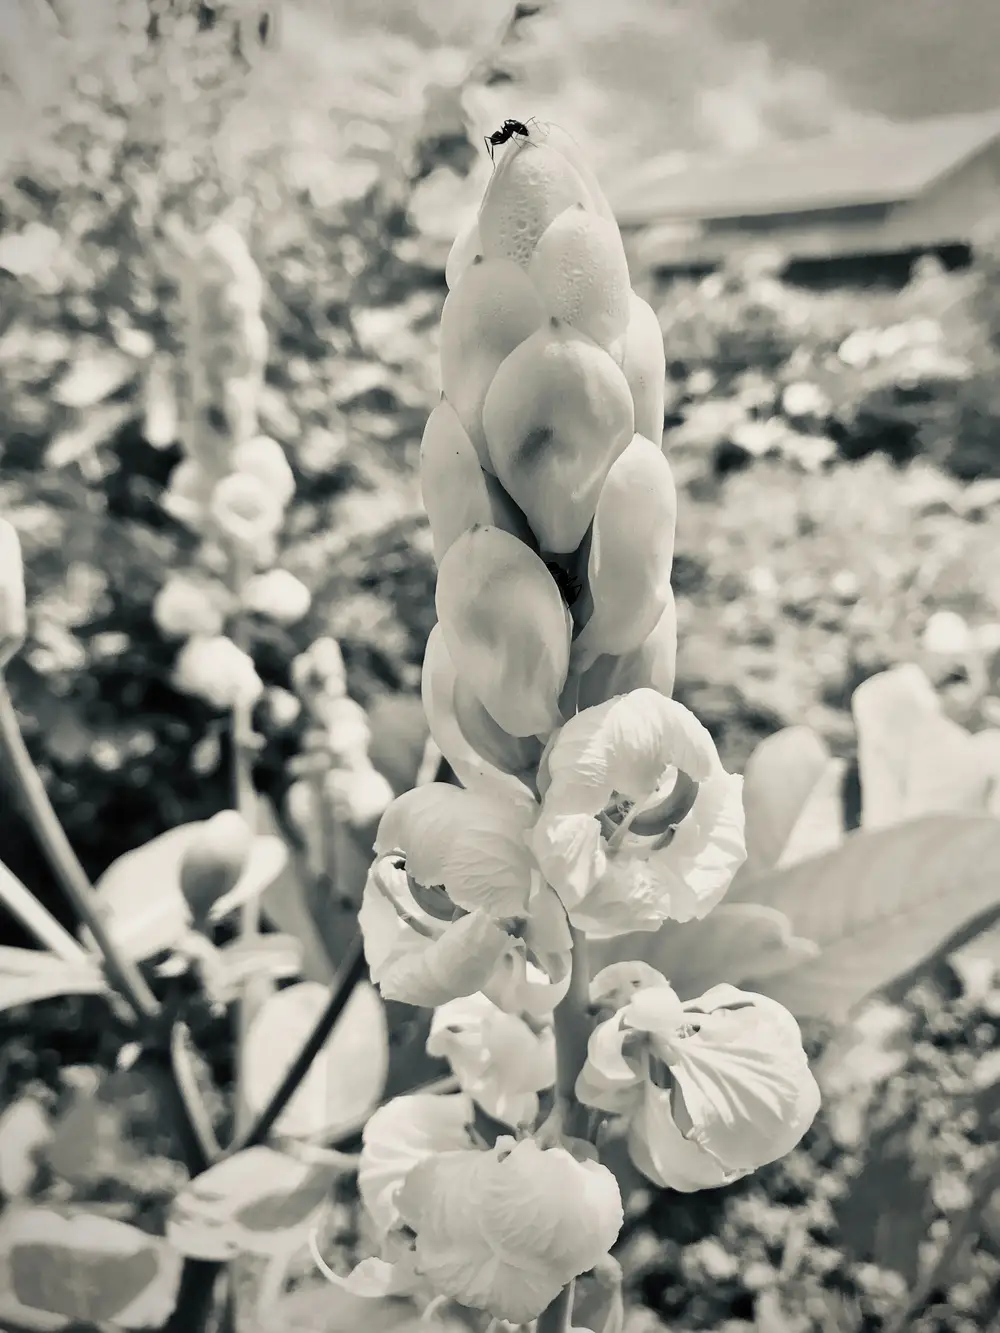 Black and white photo of a plant